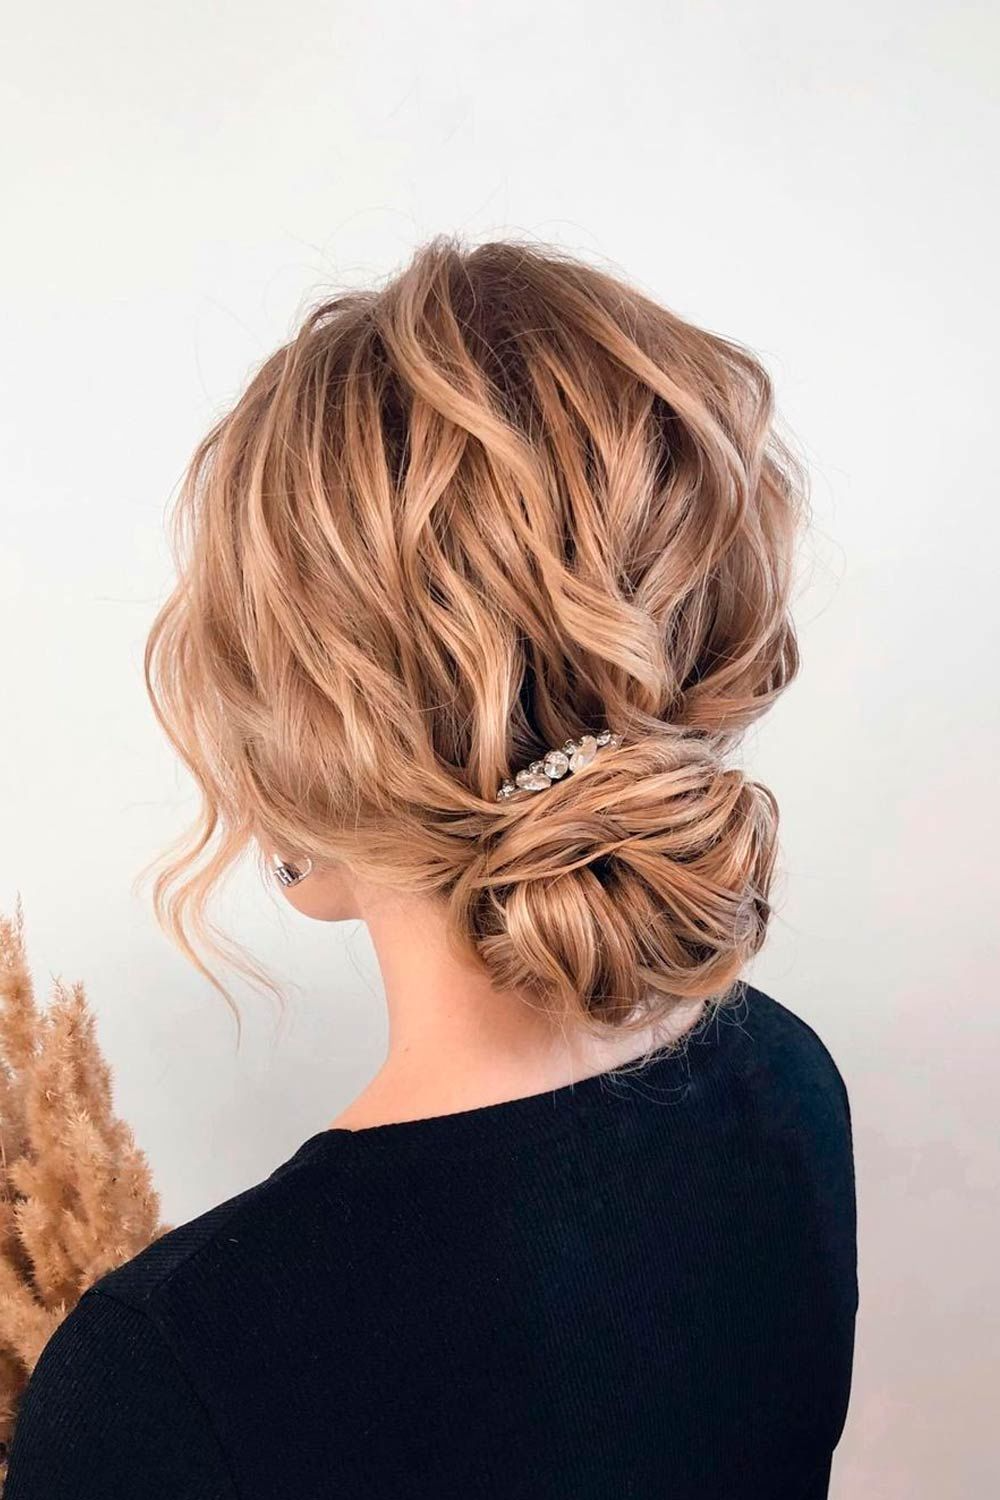 Effortless Hairstyles for Busy Mornings